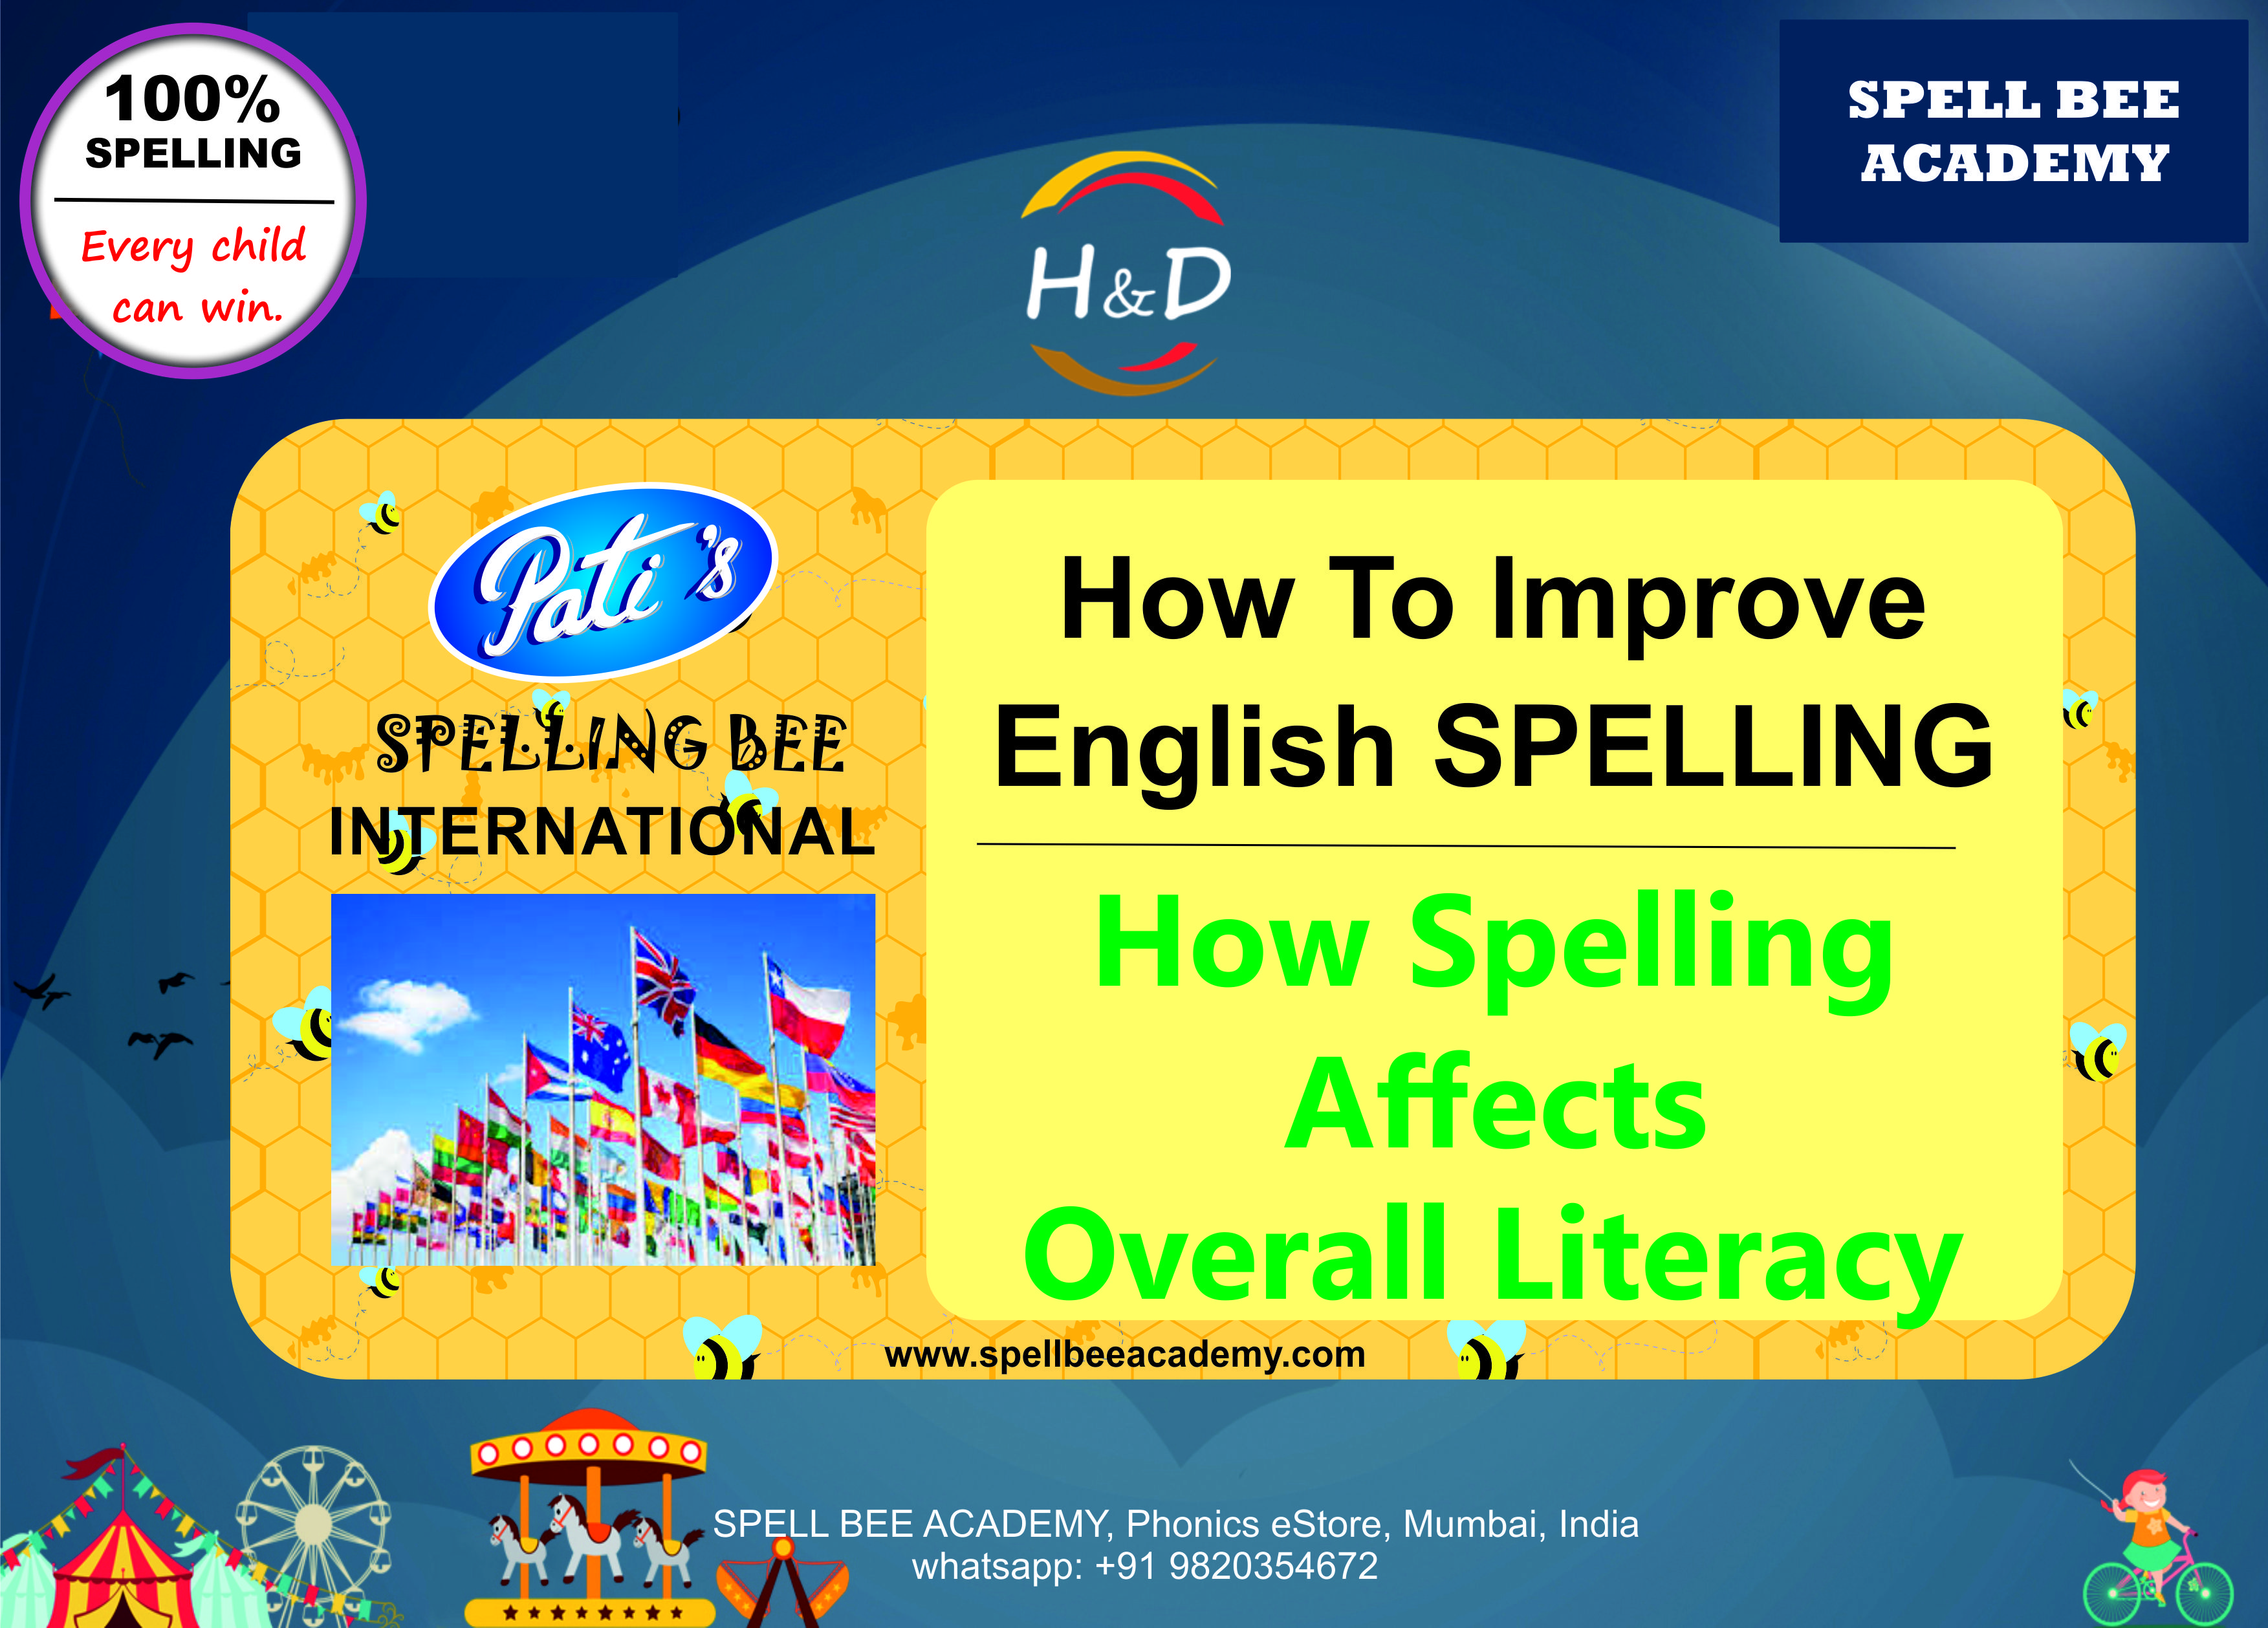 How Spelling Affects Overall Literacy